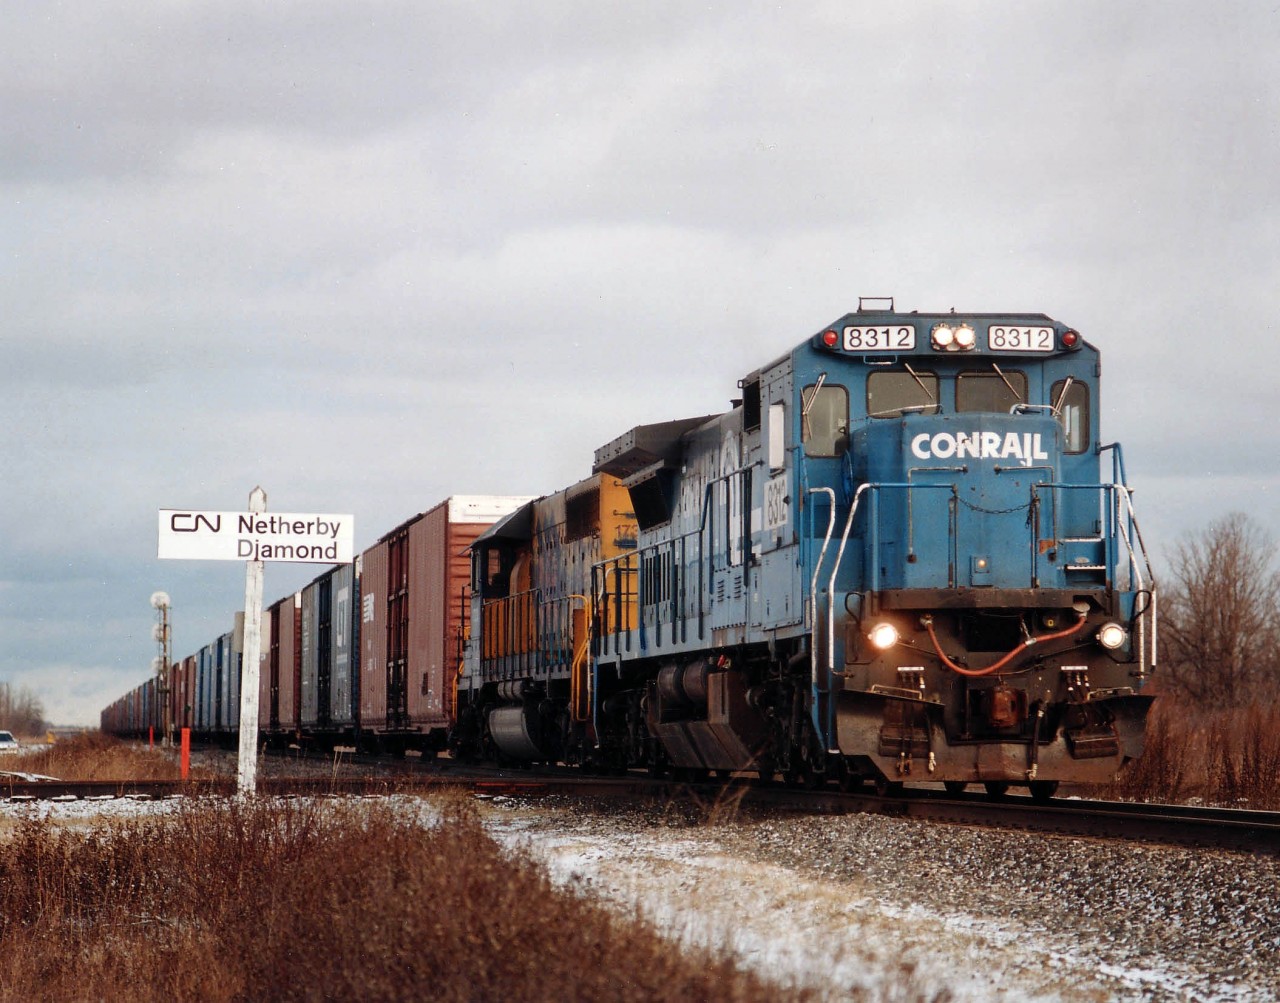 It sure was a tragic loss of locomotive paint scheme variety in Niagara with the demise of NS 327/328 in the late 2000s. Evident by this lashup almost anything could be seen. Heading Stateside is NS 8312, formerly Conrail 6047, with Ontario Northland 1733 the trailing unit. NS 'white patched' the unit numbers under the cab until there was an appointment at the black paint shop.